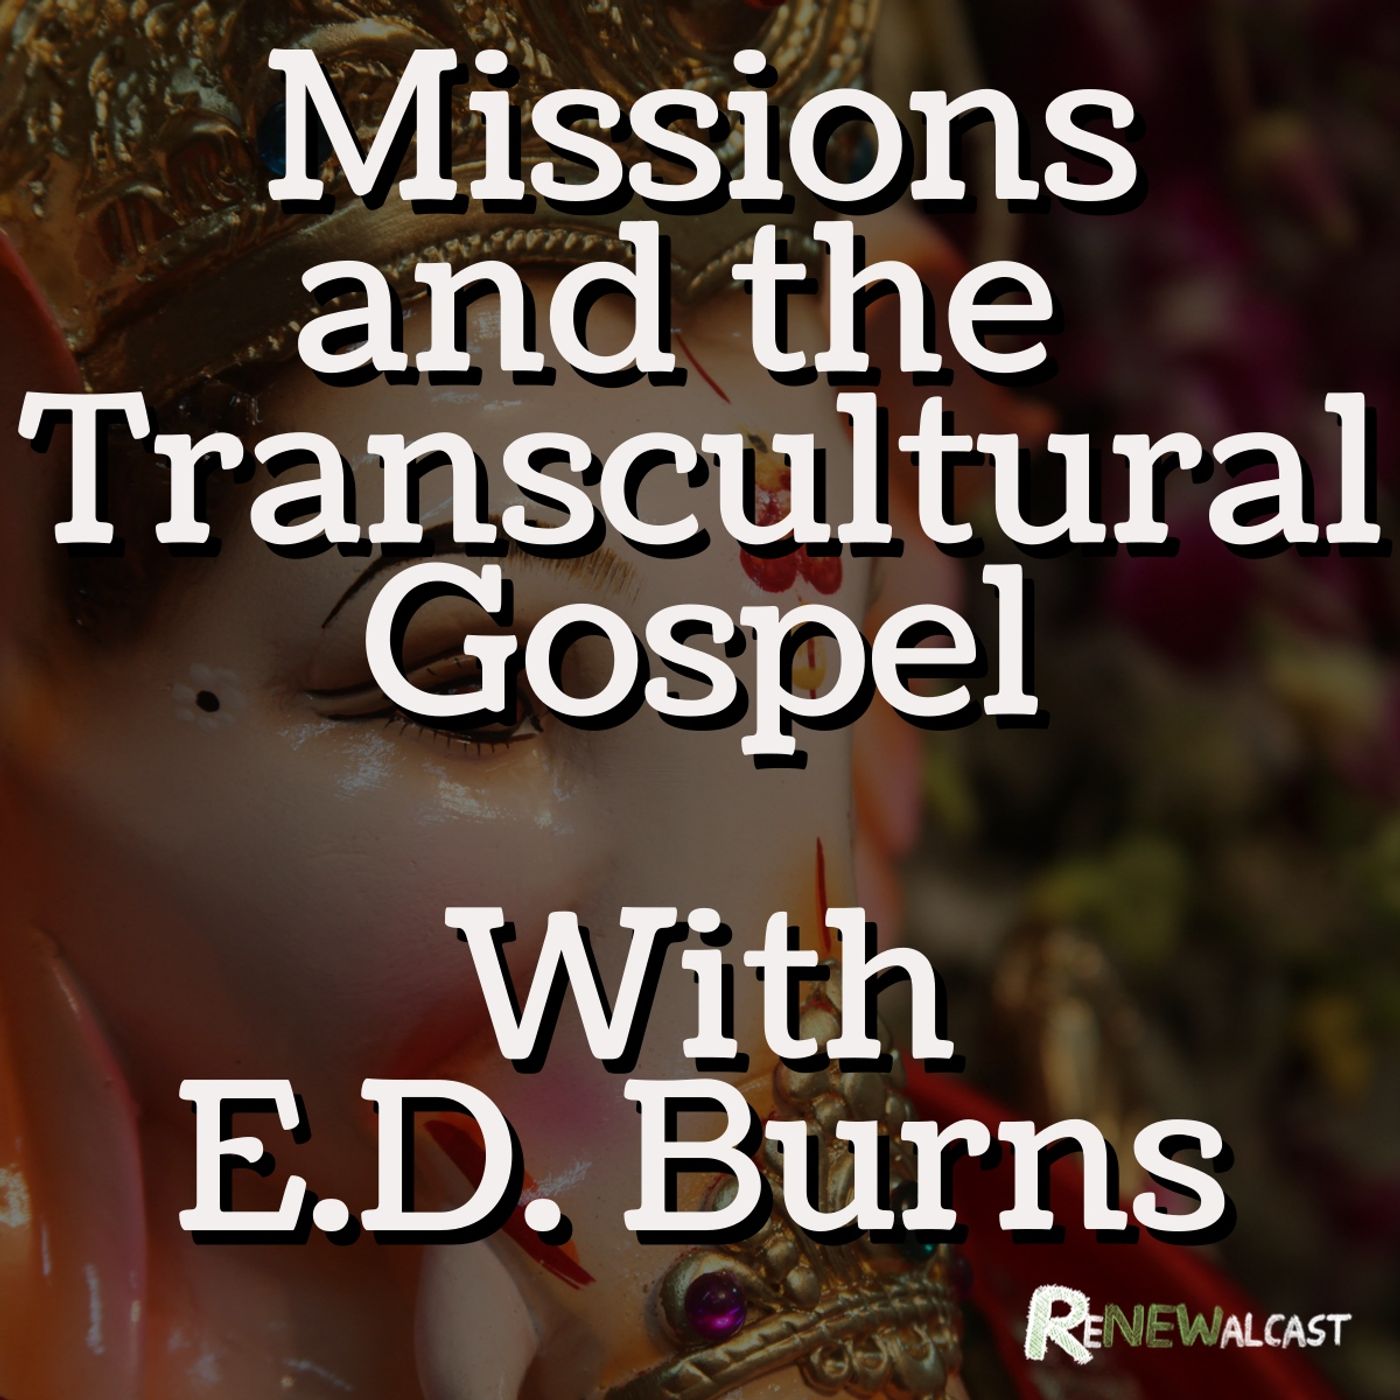 Missions and the Transcultural Gospel with E.D. Burns